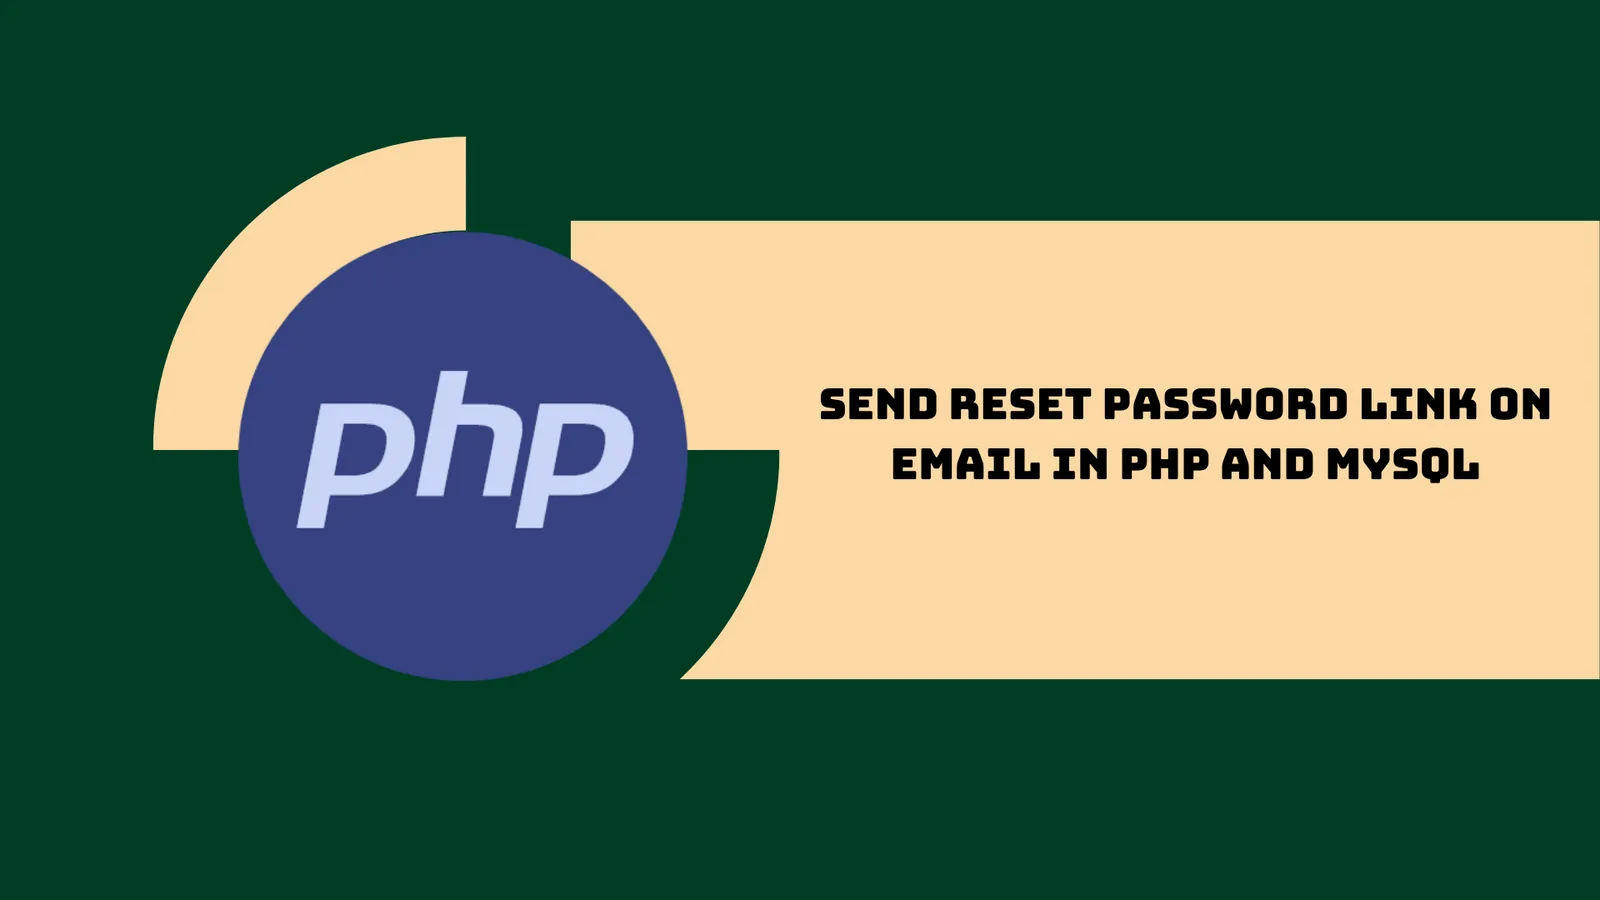 How to Send Reset Password Link on Email in PHP and MySQL